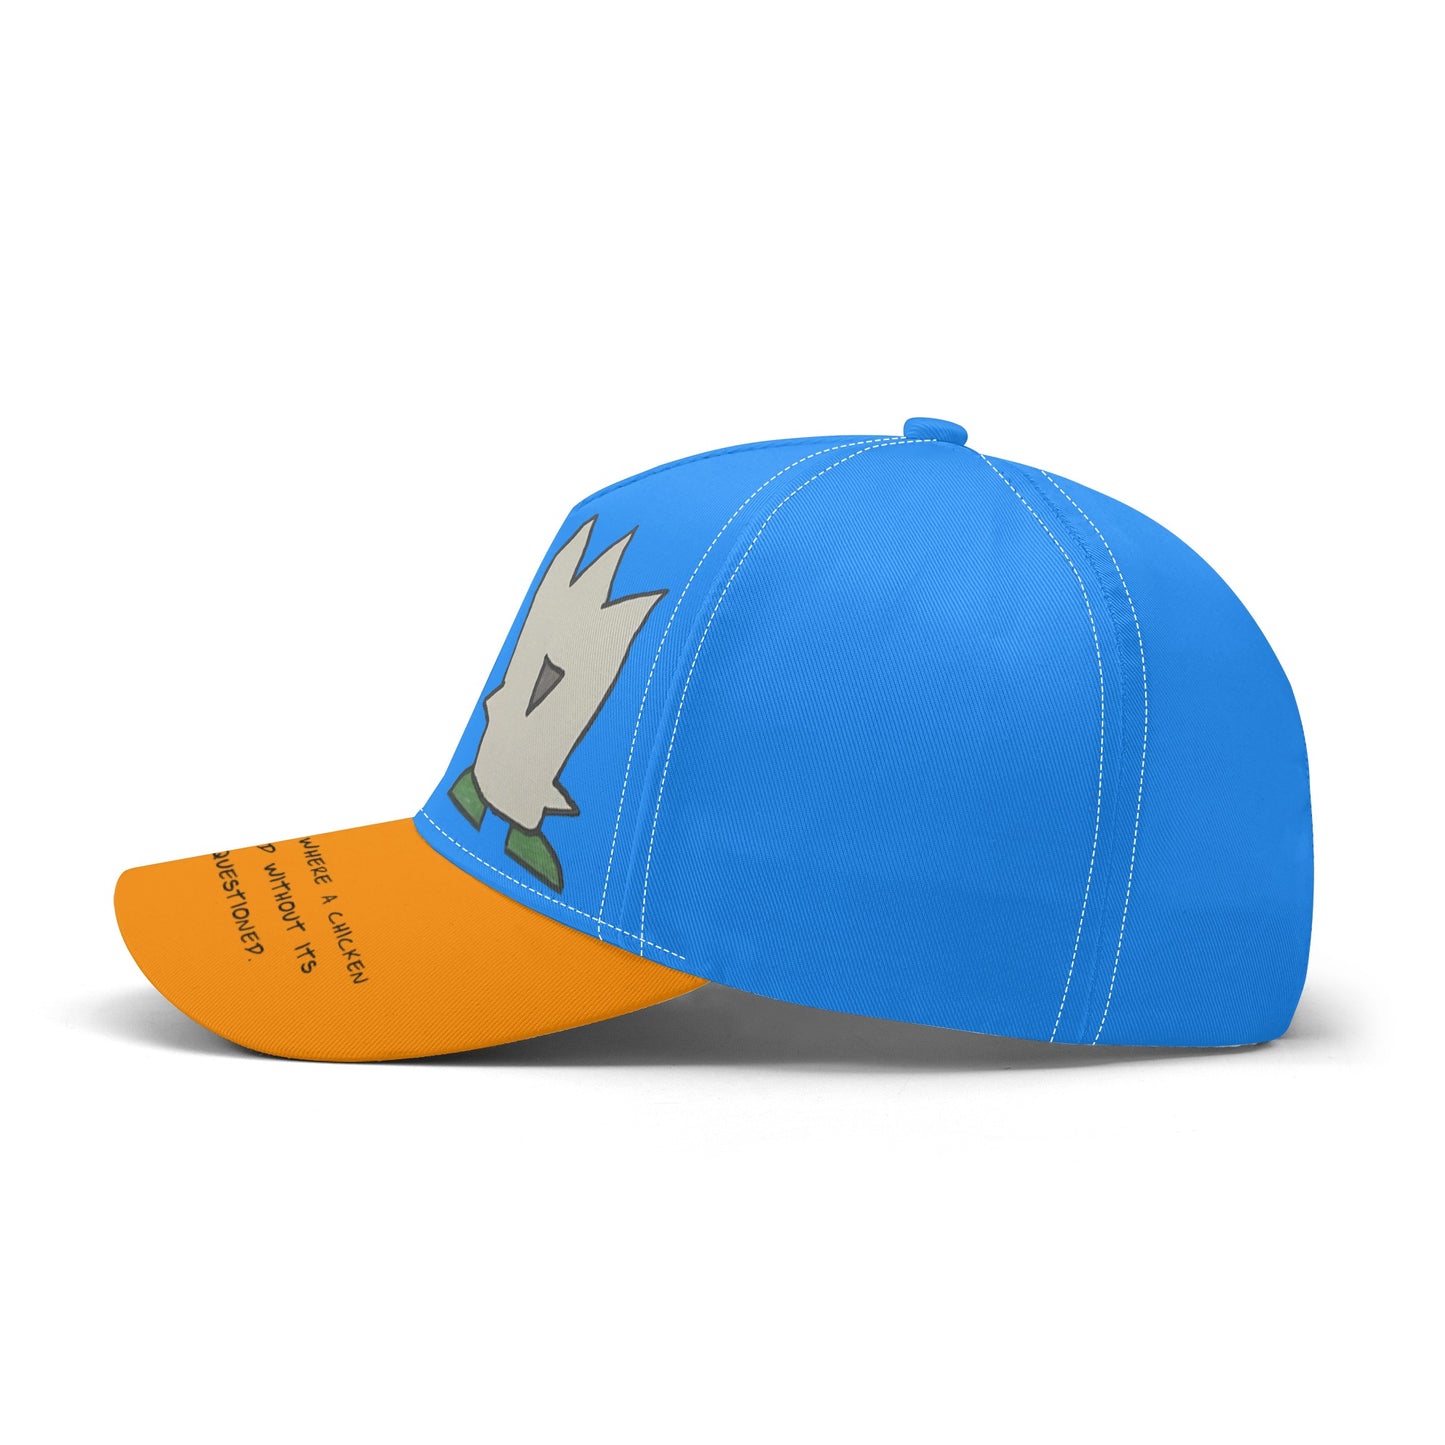 'I dream of a world' Baseball Cap in Blue/Orange with Fuzzy and Muffin artwork by D.B.